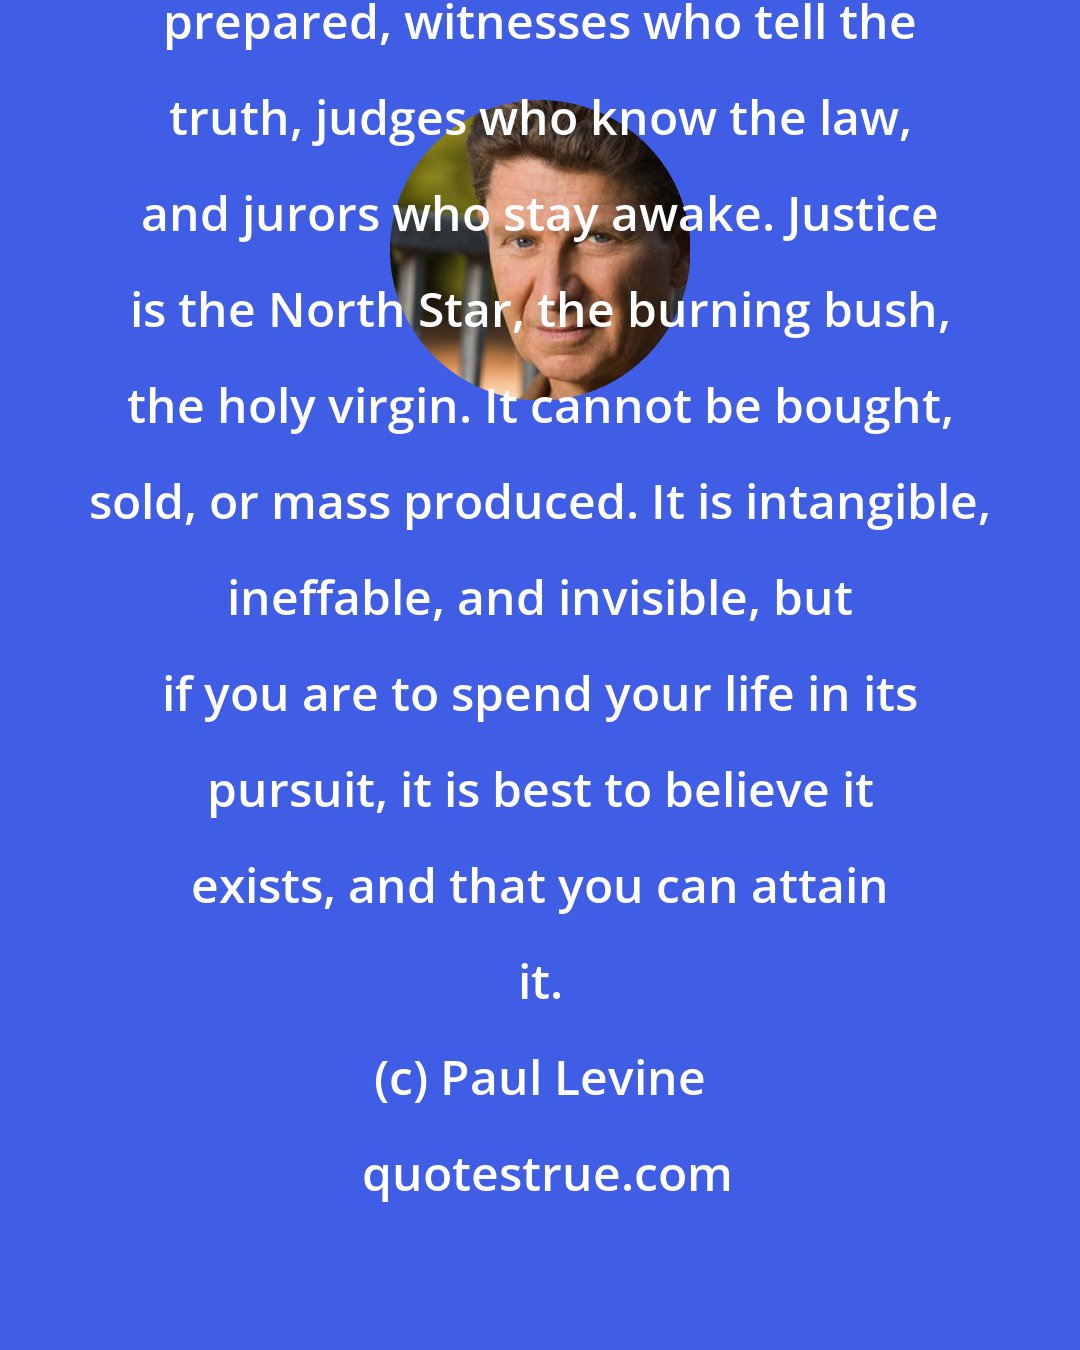 Paul Levine: Justice requires lawyers who are prepared, witnesses who tell the truth, judges who know the law, and jurors who stay awake. Justice is the North Star, the burning bush, the holy virgin. It cannot be bought, sold, or mass produced. It is intangible, ineffable, and invisible, but if you are to spend your life in its pursuit, it is best to believe it exists, and that you can attain it.